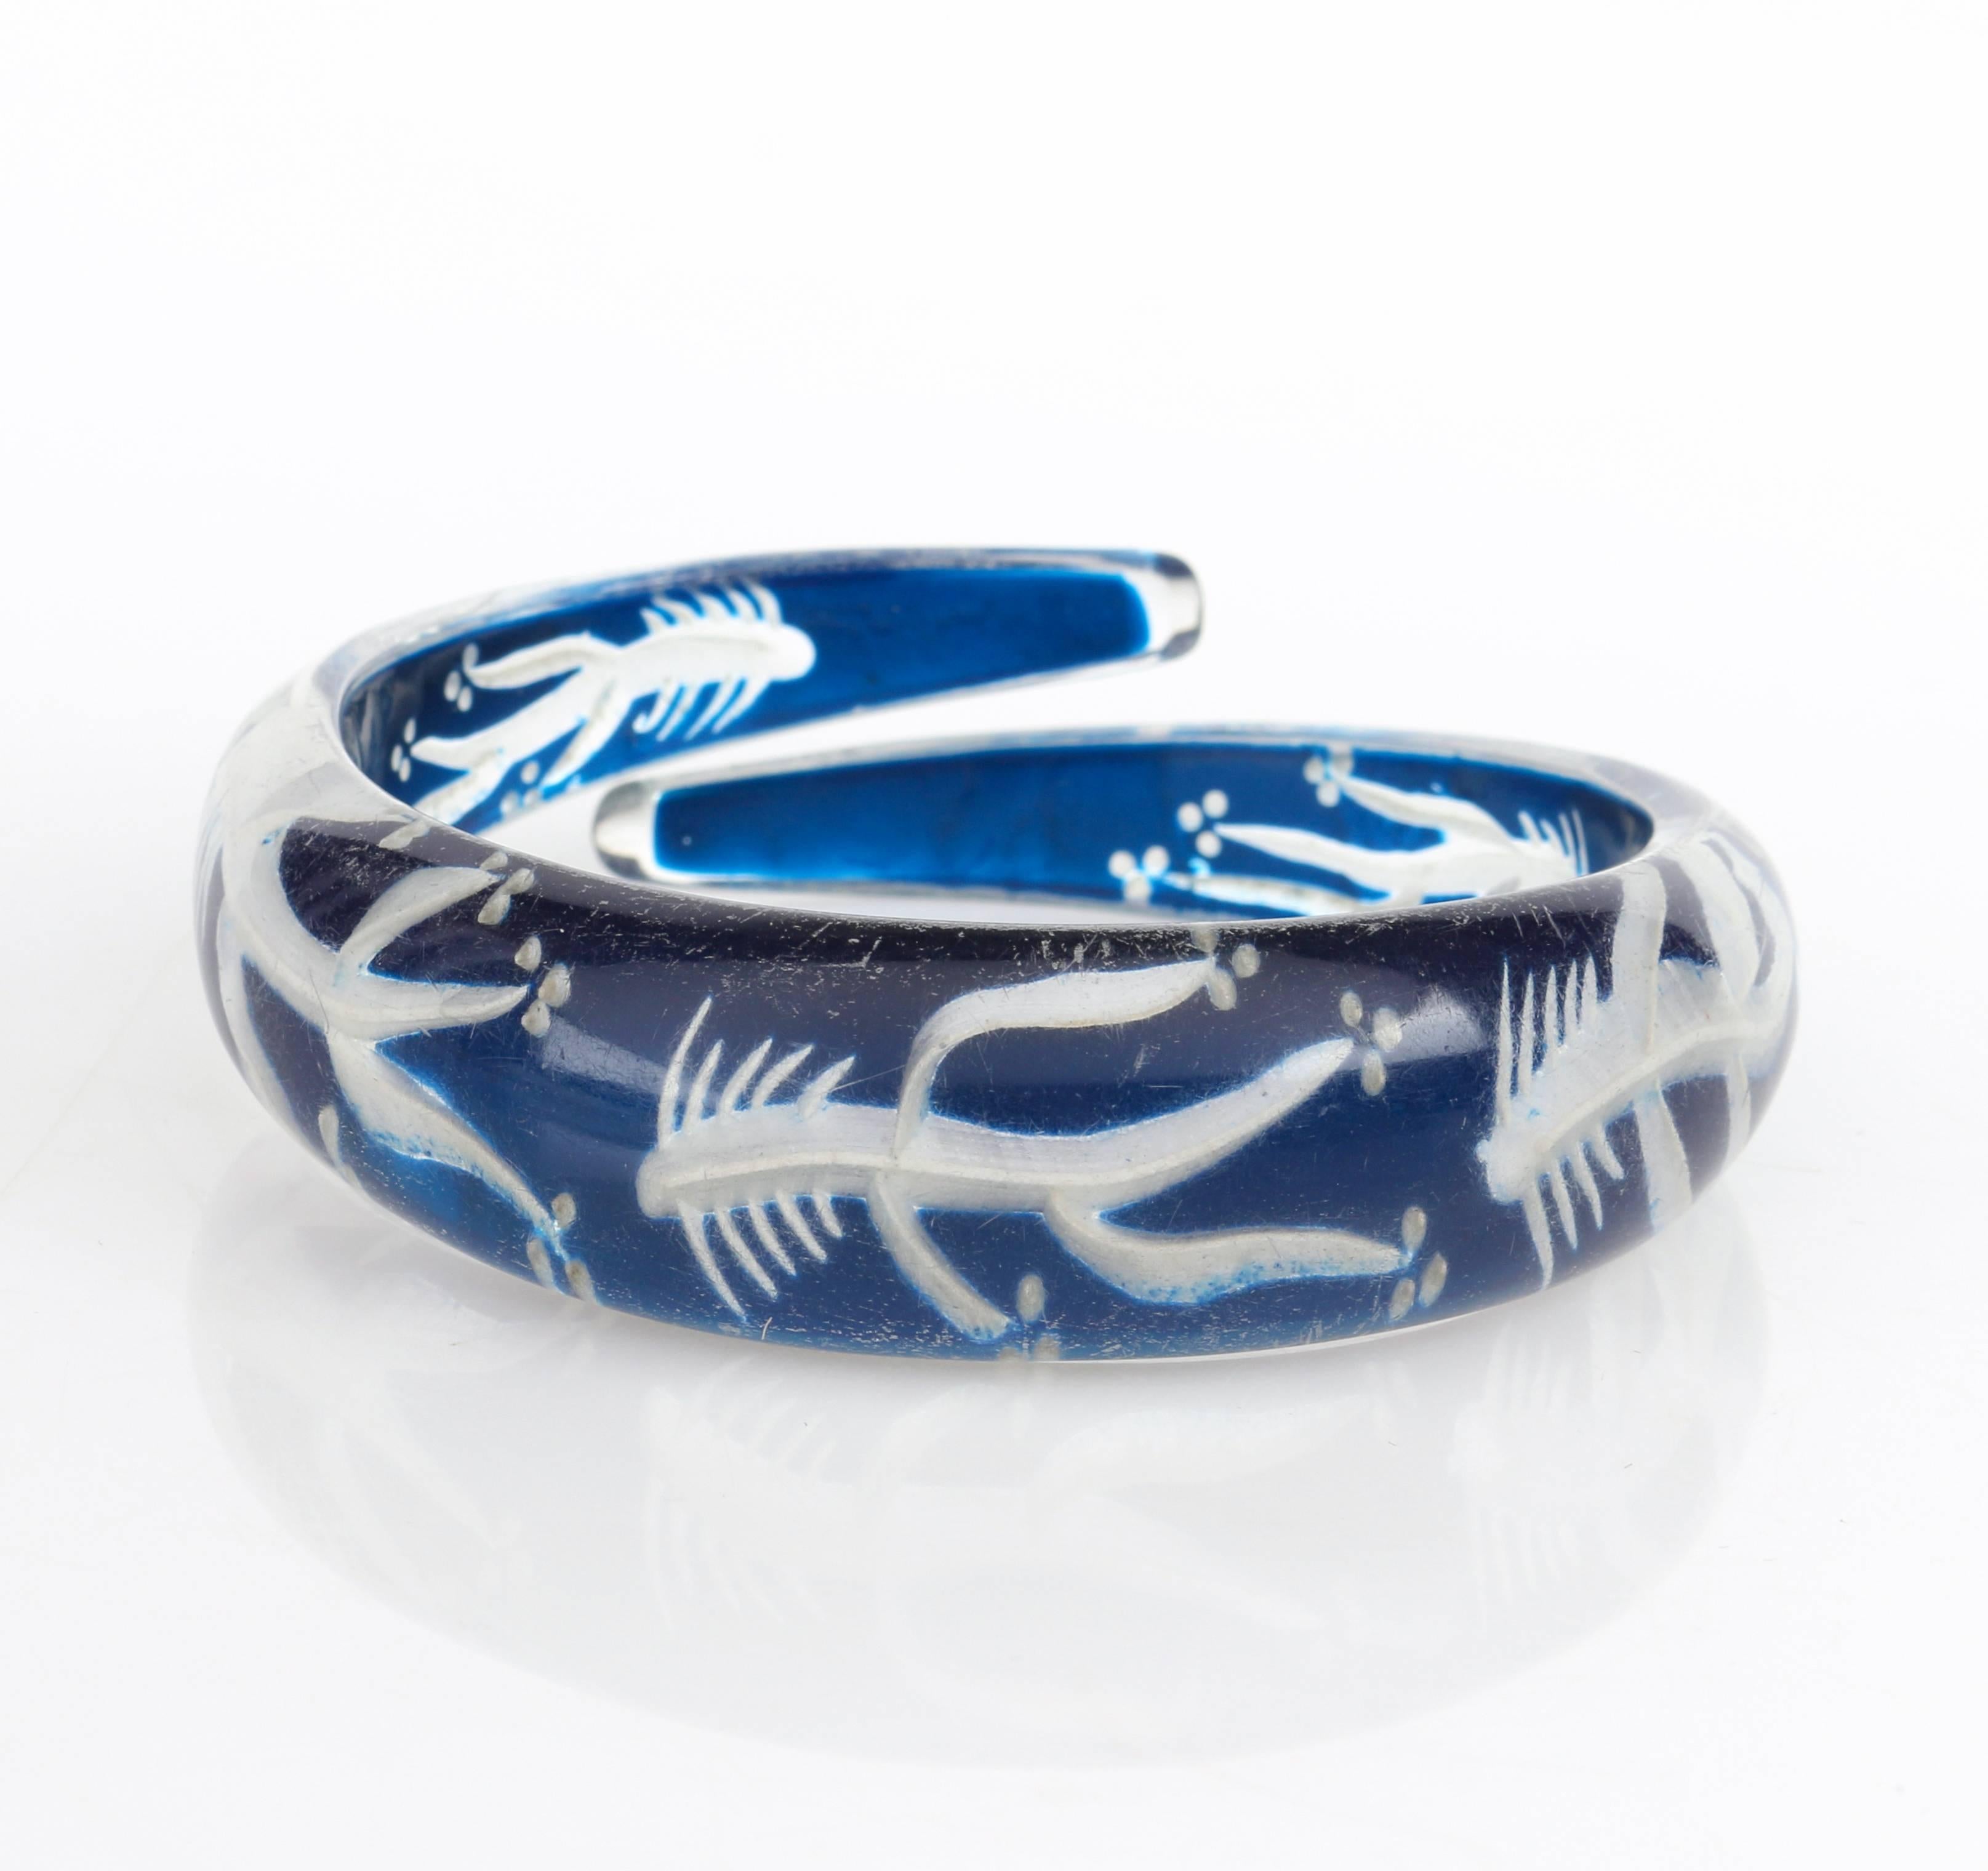 Extremely rare vintage circa late 1930's - early 1940's clear plastic with blue color back etched fish bone design bypass bangle bracelet. Reversed hand carved horizontal fish bone pattern repeated around bracelet. Back of bracelet is a deep blue